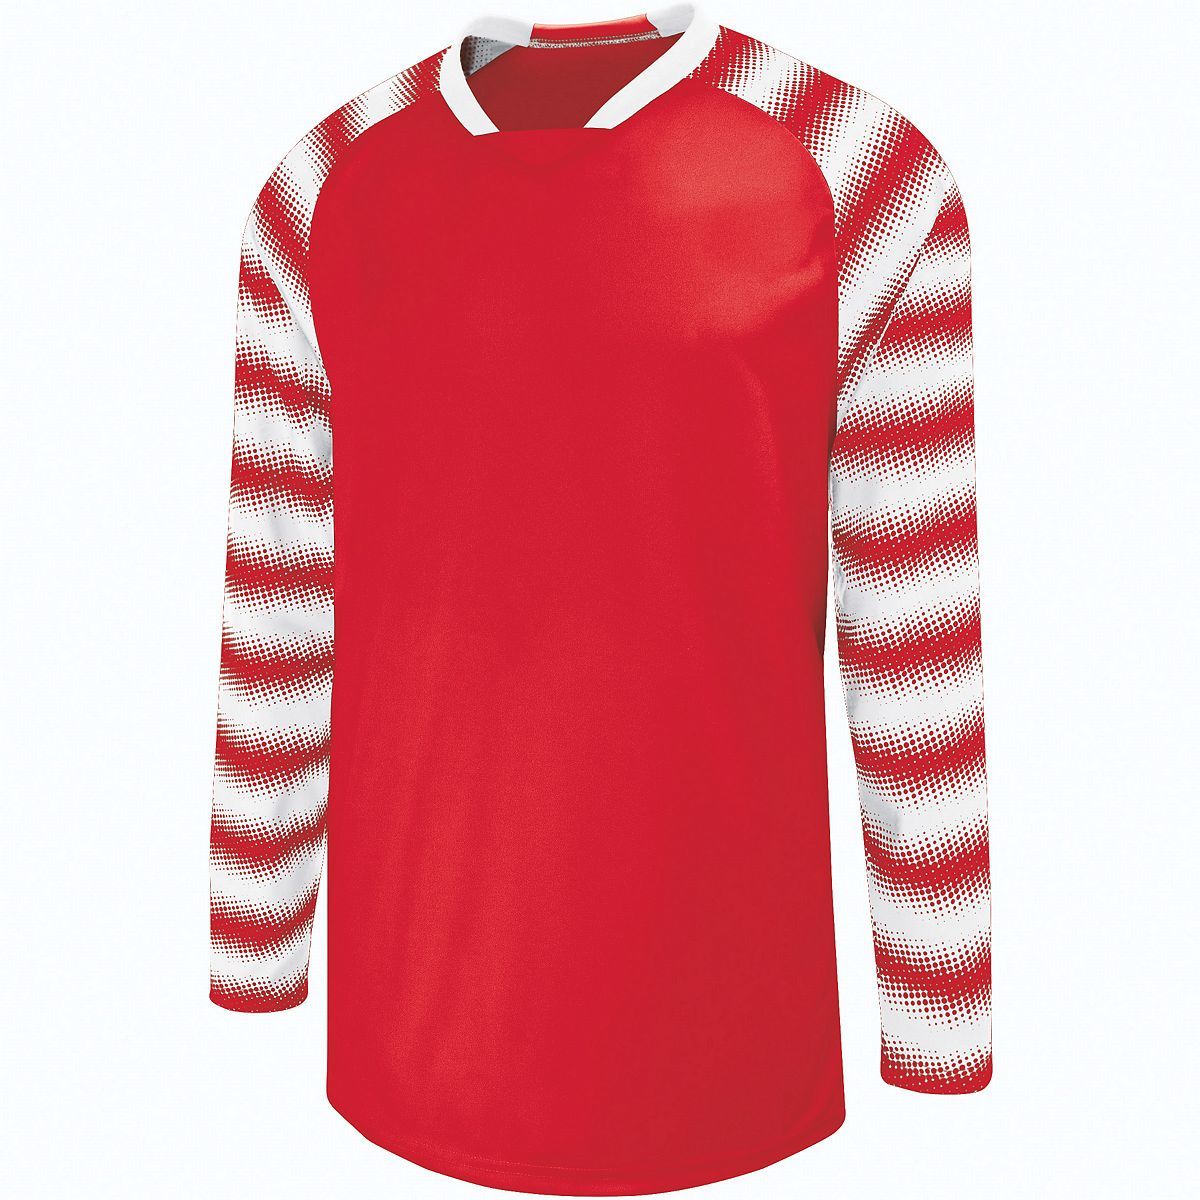 High 5 Youth Prism Goalkeeper Jersey in Scarlet/White  -Part of the Youth, Youth-Jersey, High5-Products, Soccer, Shirts, All-Sports-1 product lines at KanaleyCreations.com